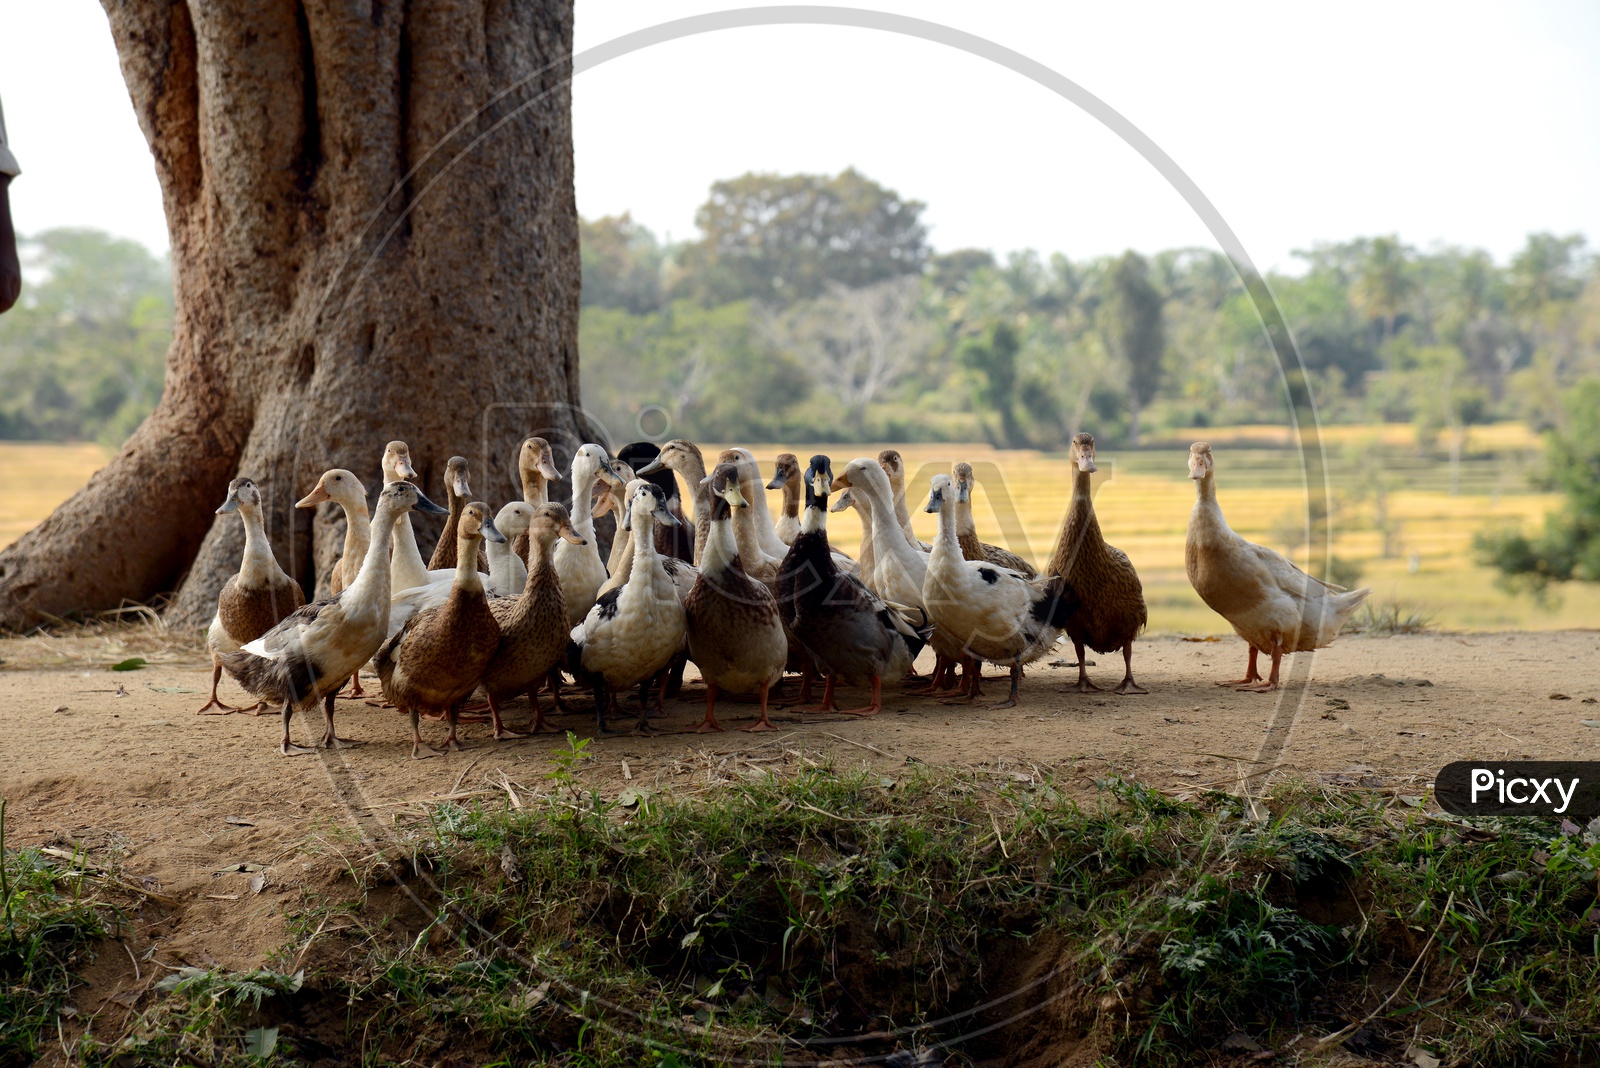 A Group Of Ducks Walking on Bank Of A Lake  In Rural Village